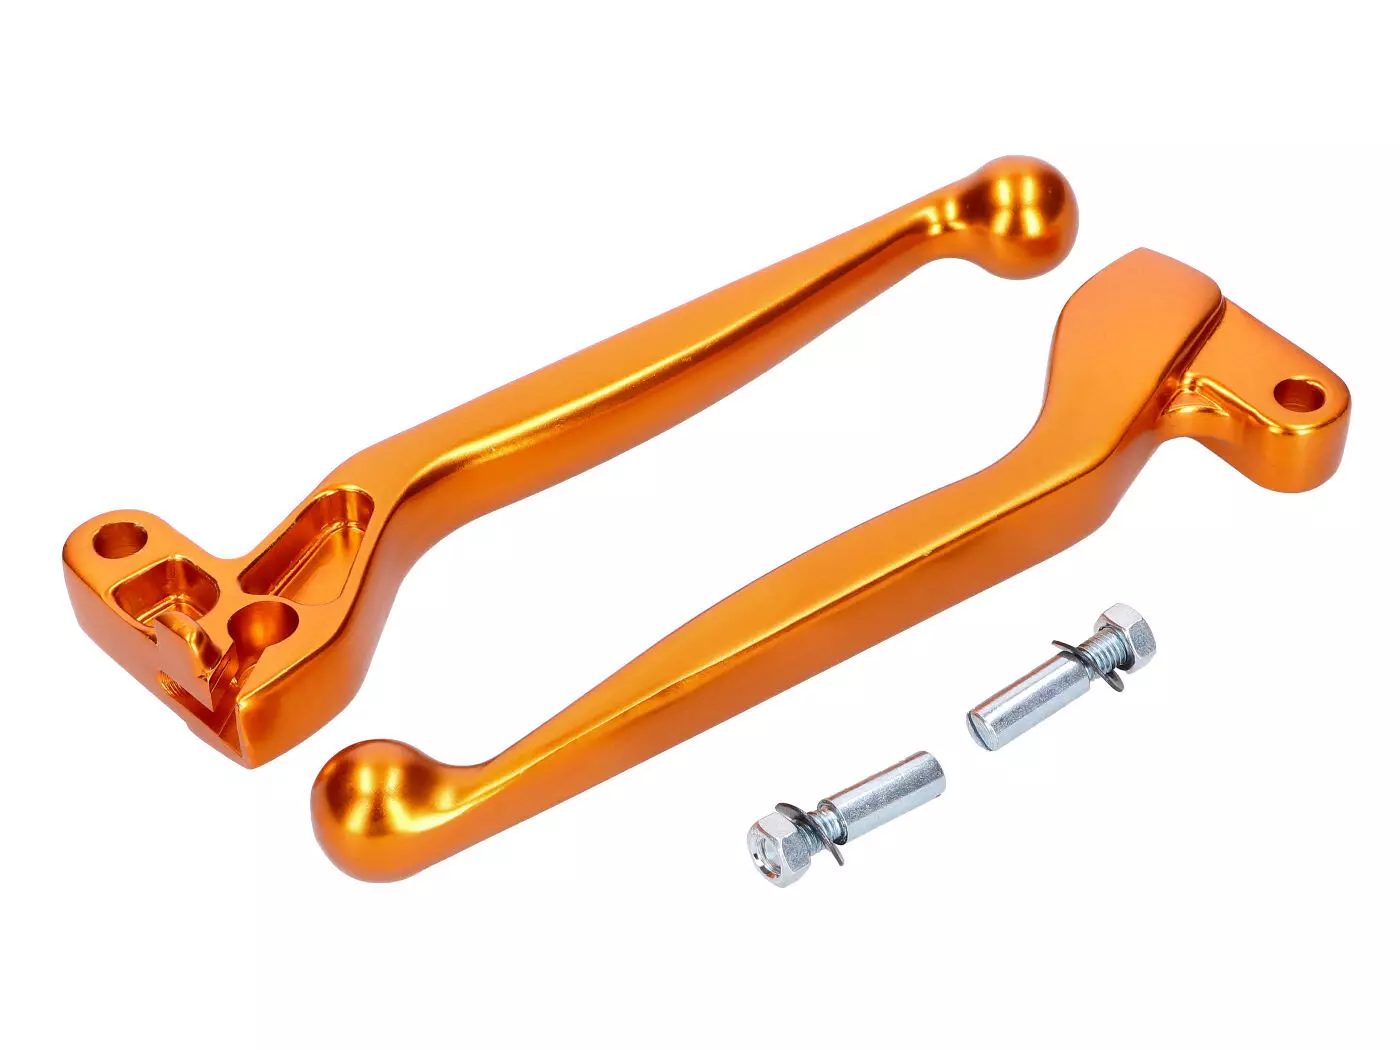 Clutch And Brake Lever Set ALU Anodized Golden For Simson S50, S51, S53, S70, S83, SR50, SR80